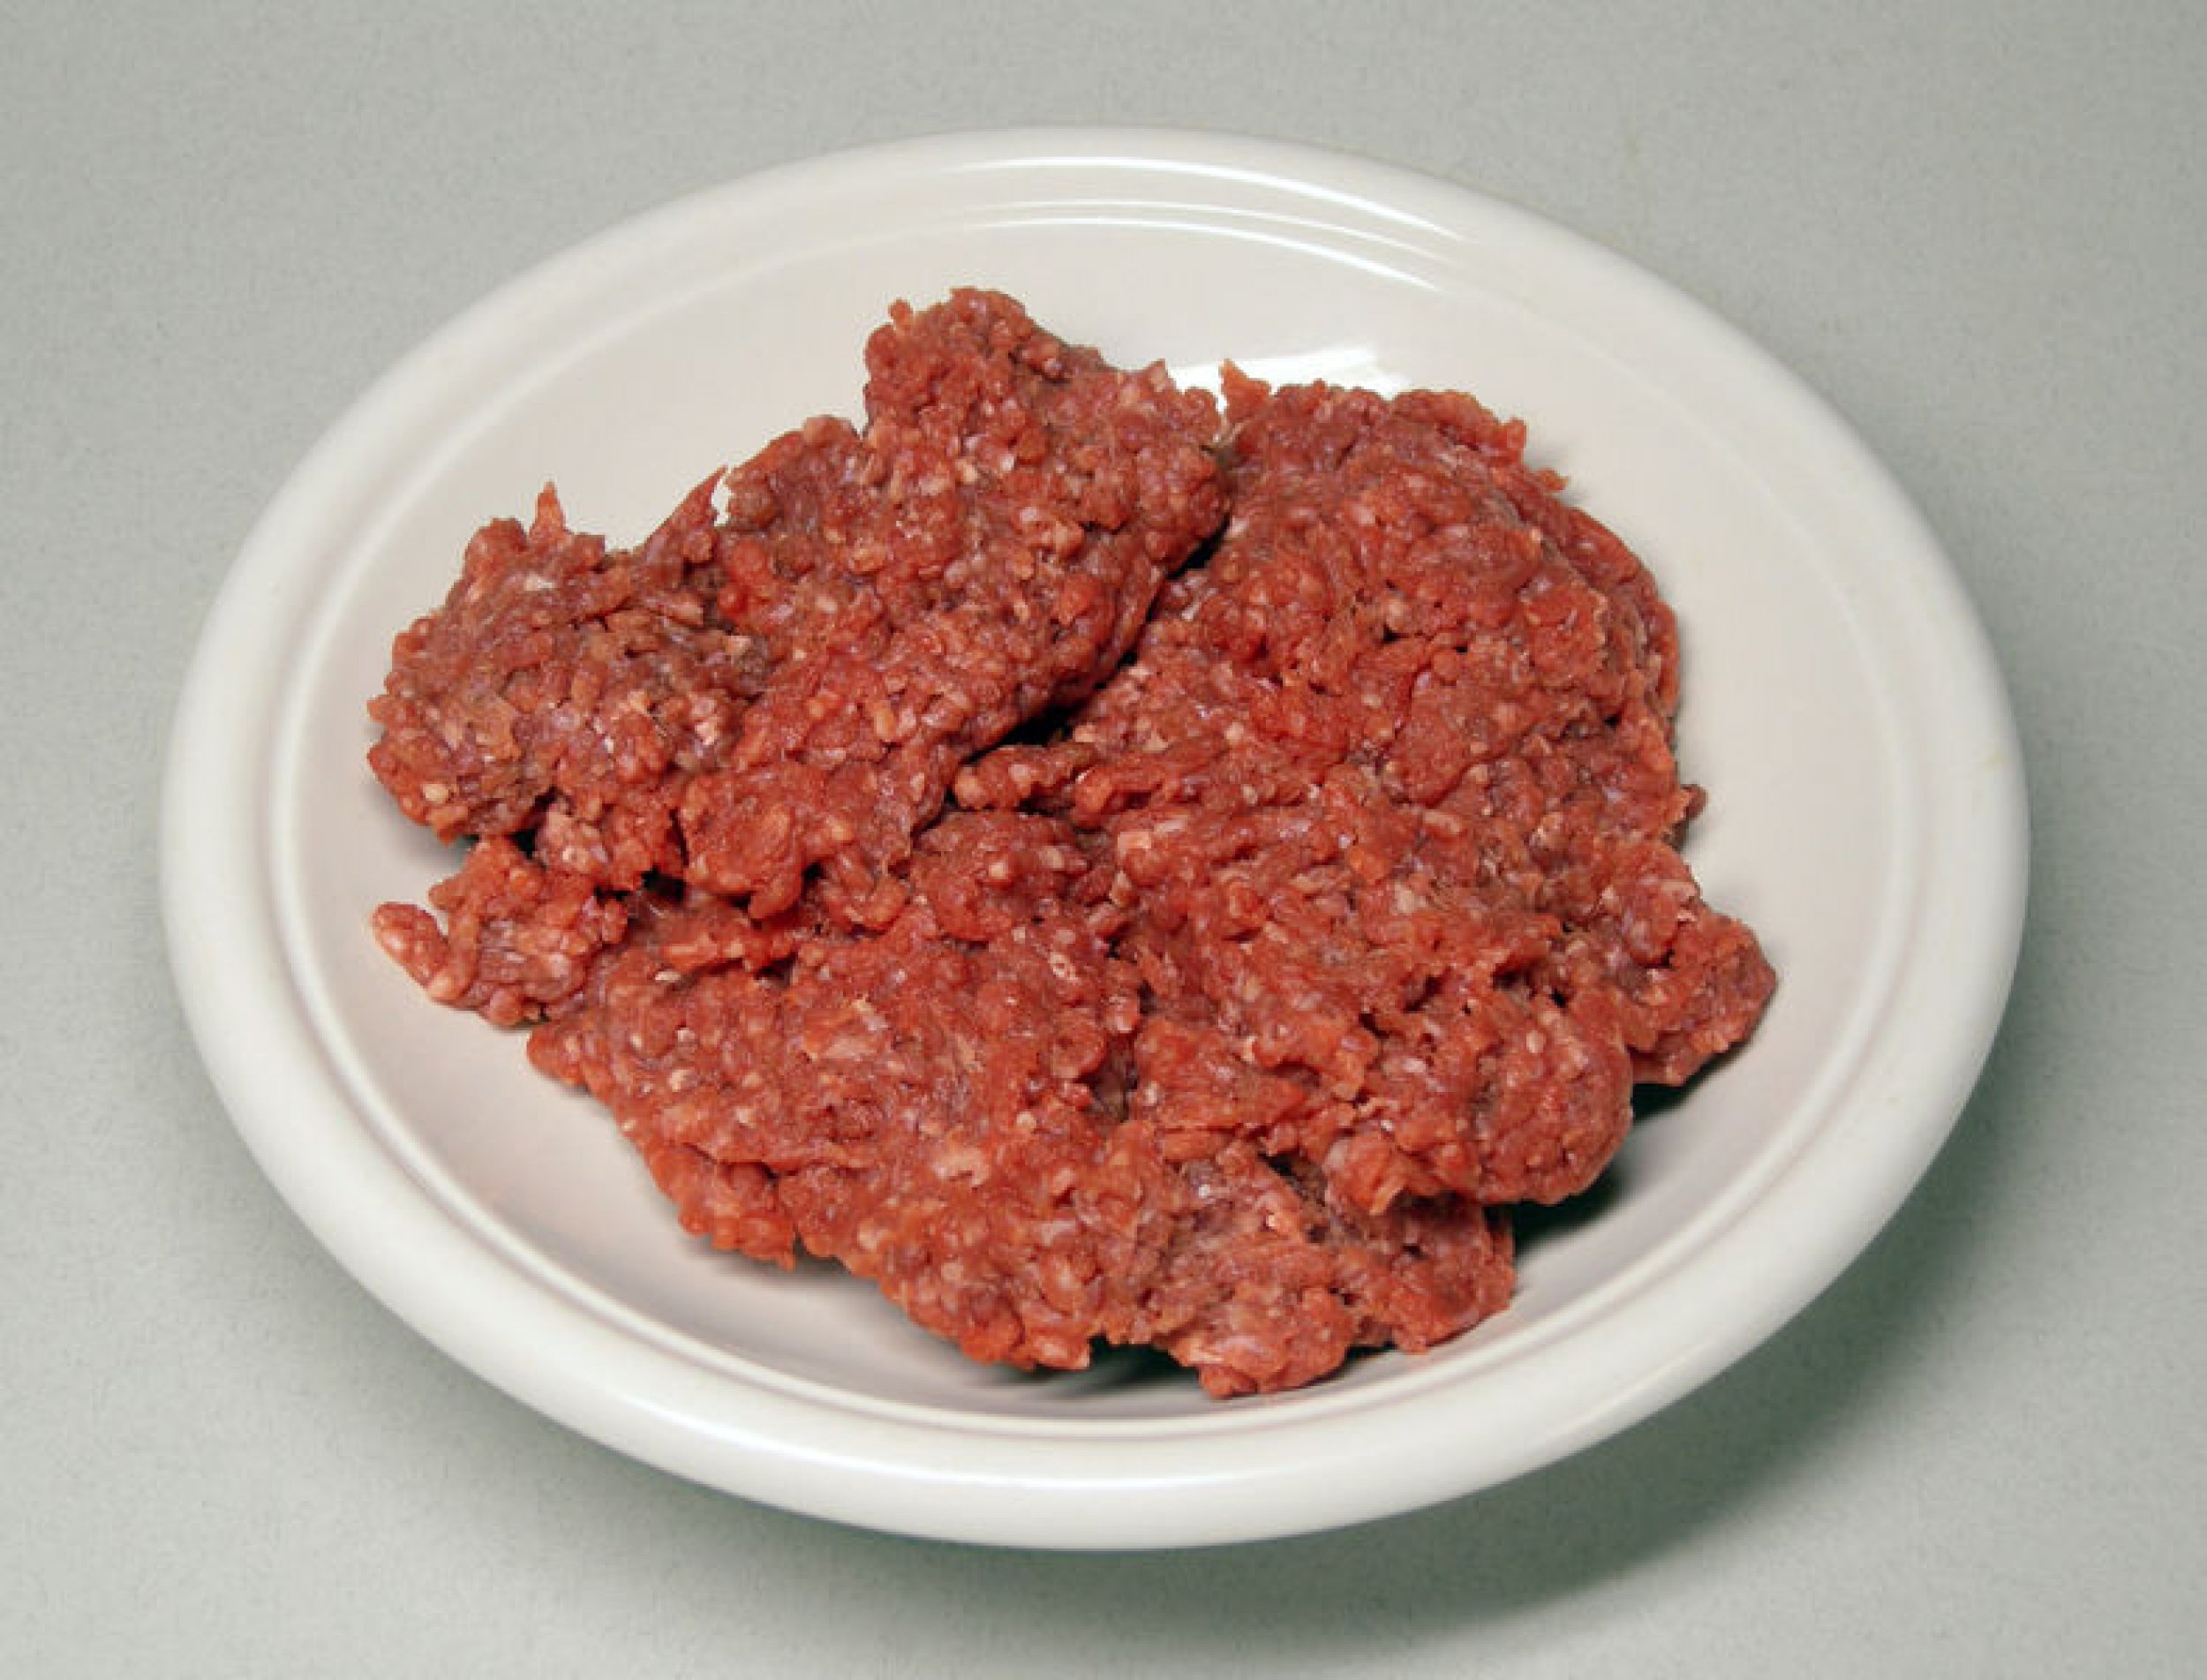 Ground Beef Recall 2013 Salmonella Found In Over 1,000 Pounds Of Beef